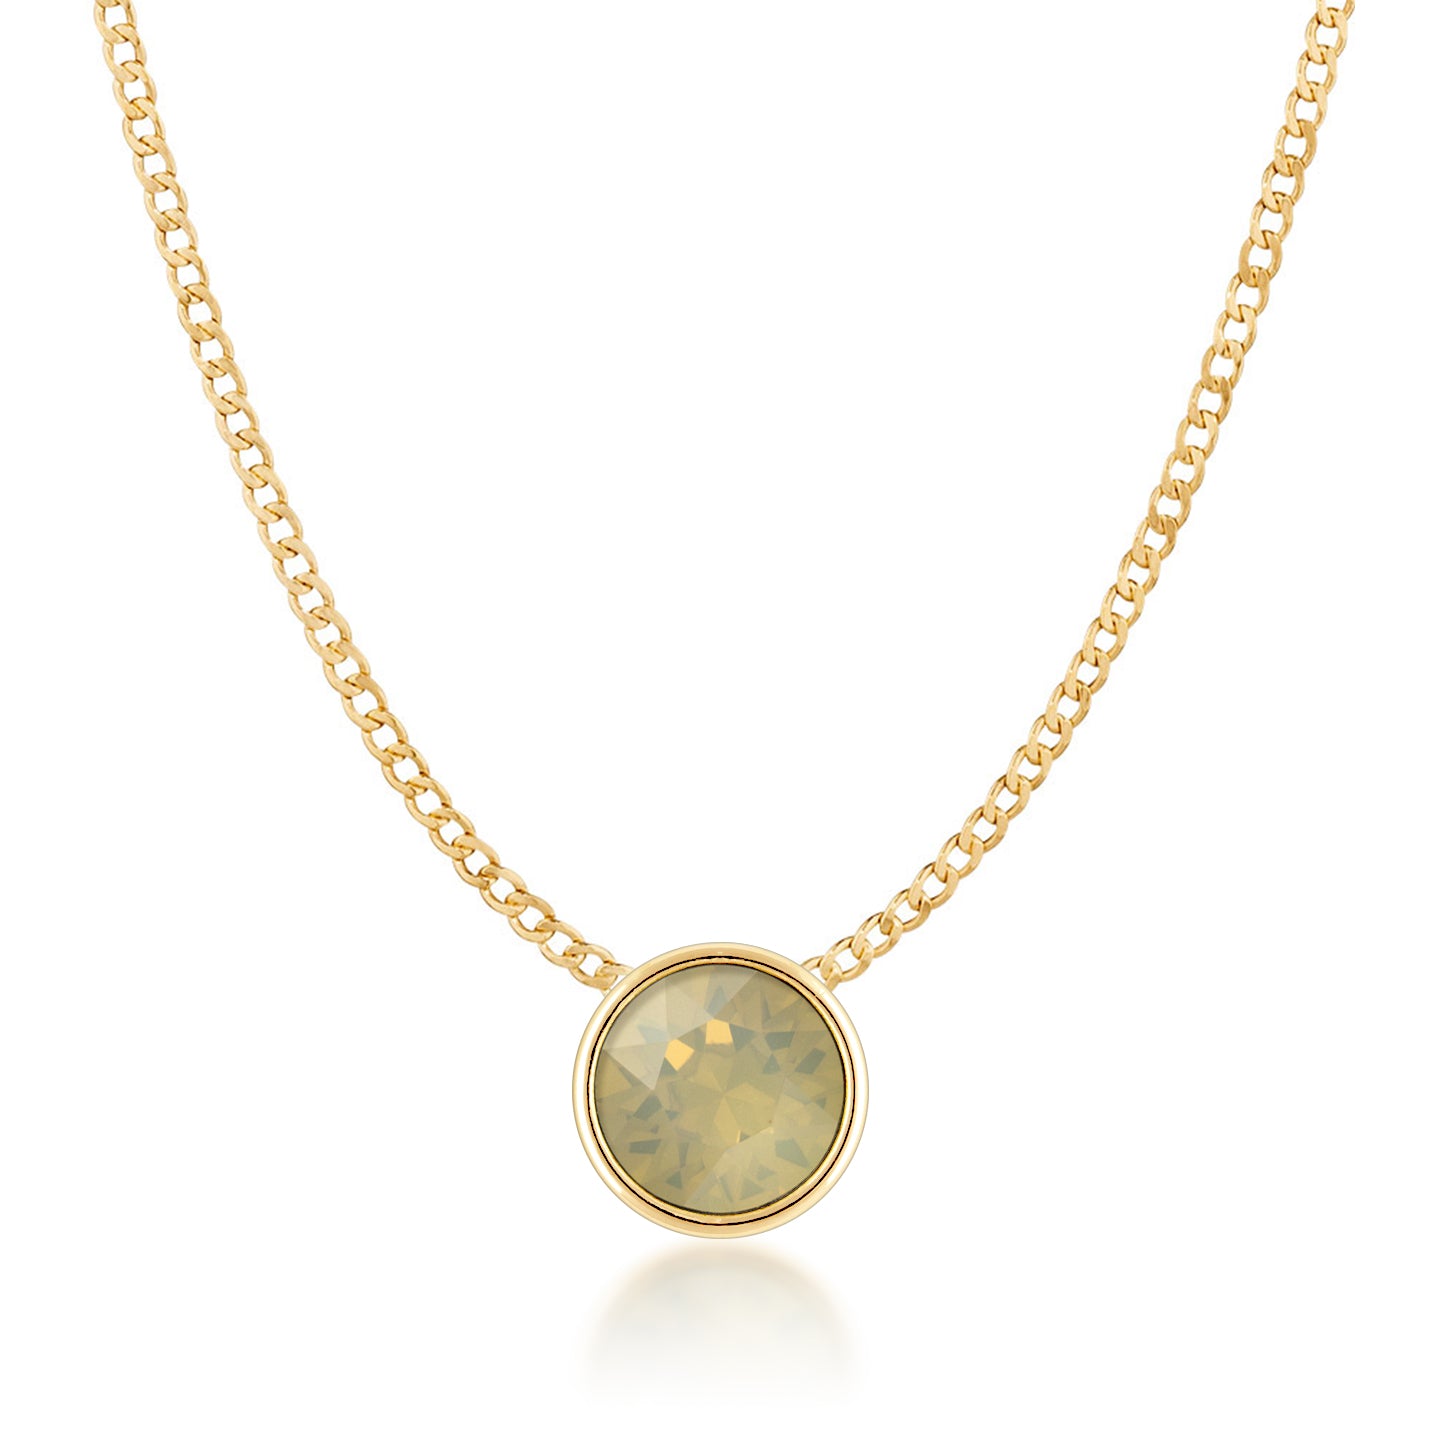 Harley Small Pendant Necklace with Beige Sand Round Opals from Swarovski Gold Plated - Ed Heart